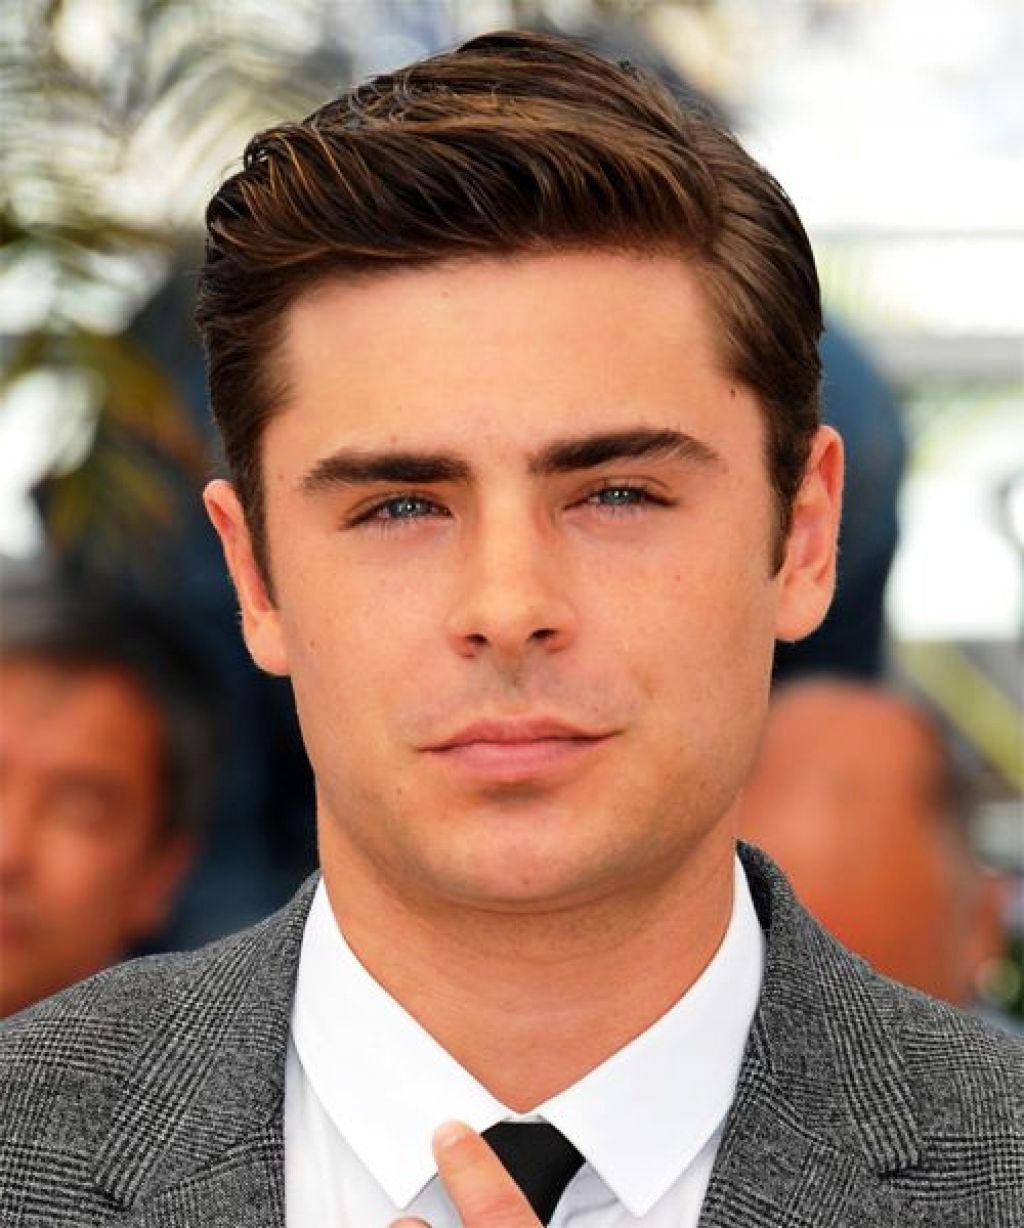 the most flattering haircuts for men by face shape | hair